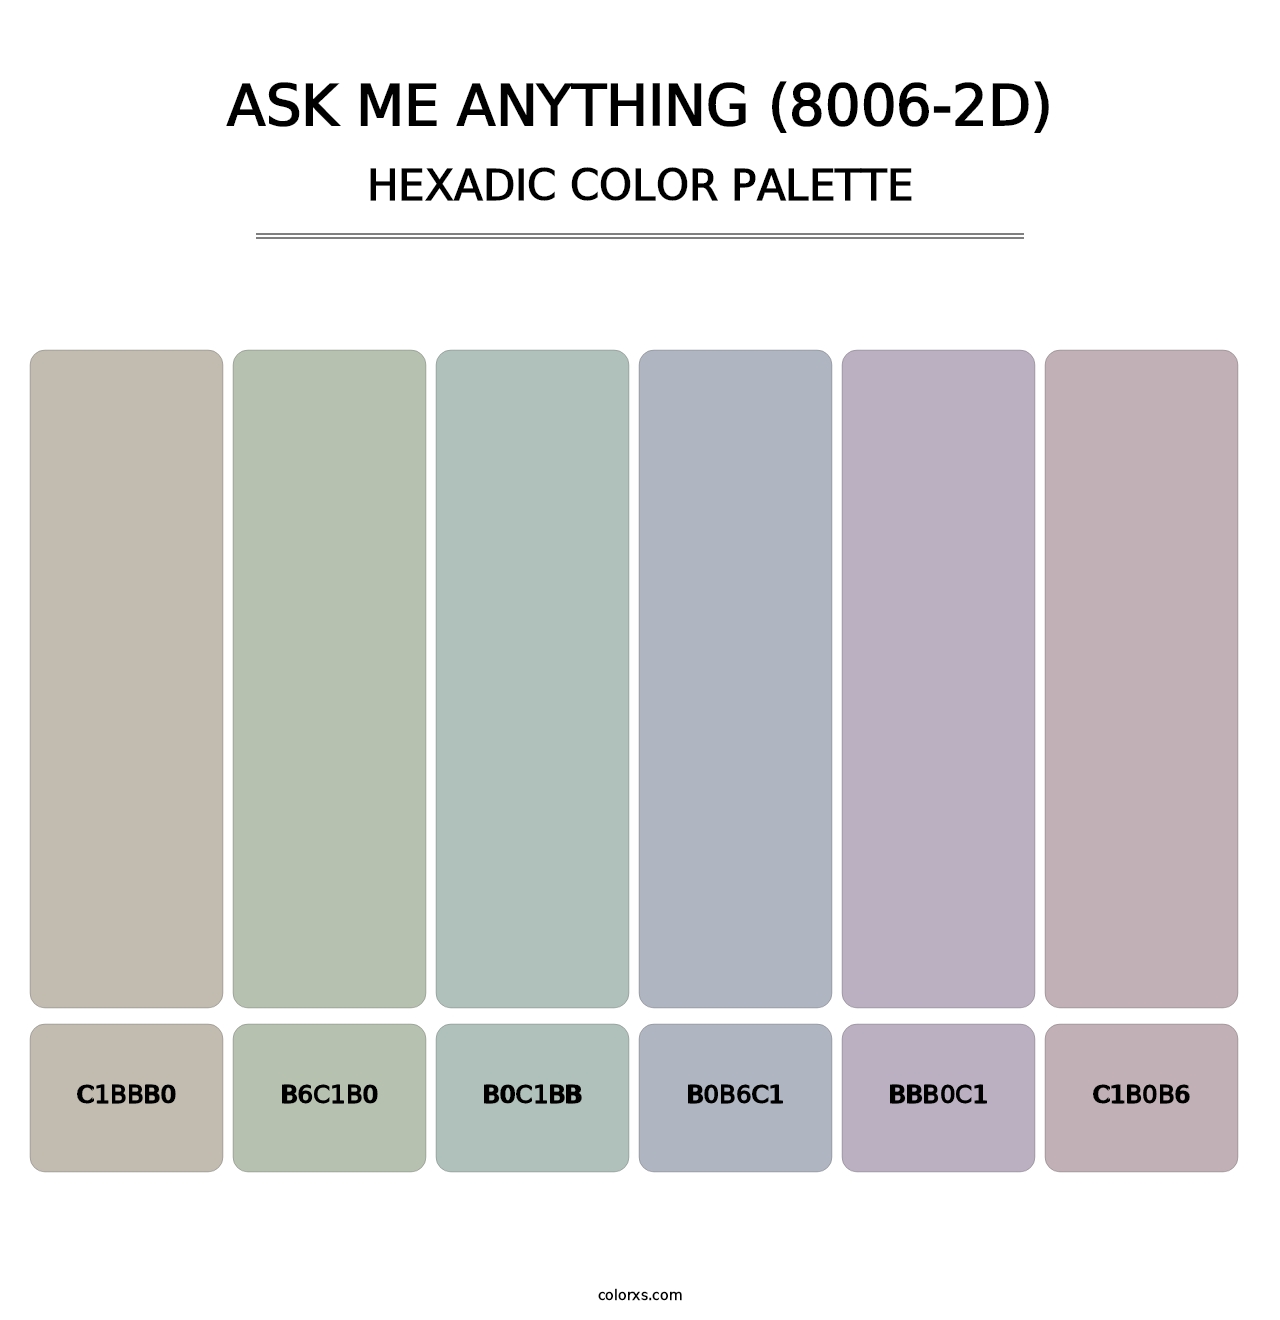 Ask Me Anything (8006-2D) - Hexadic Color Palette